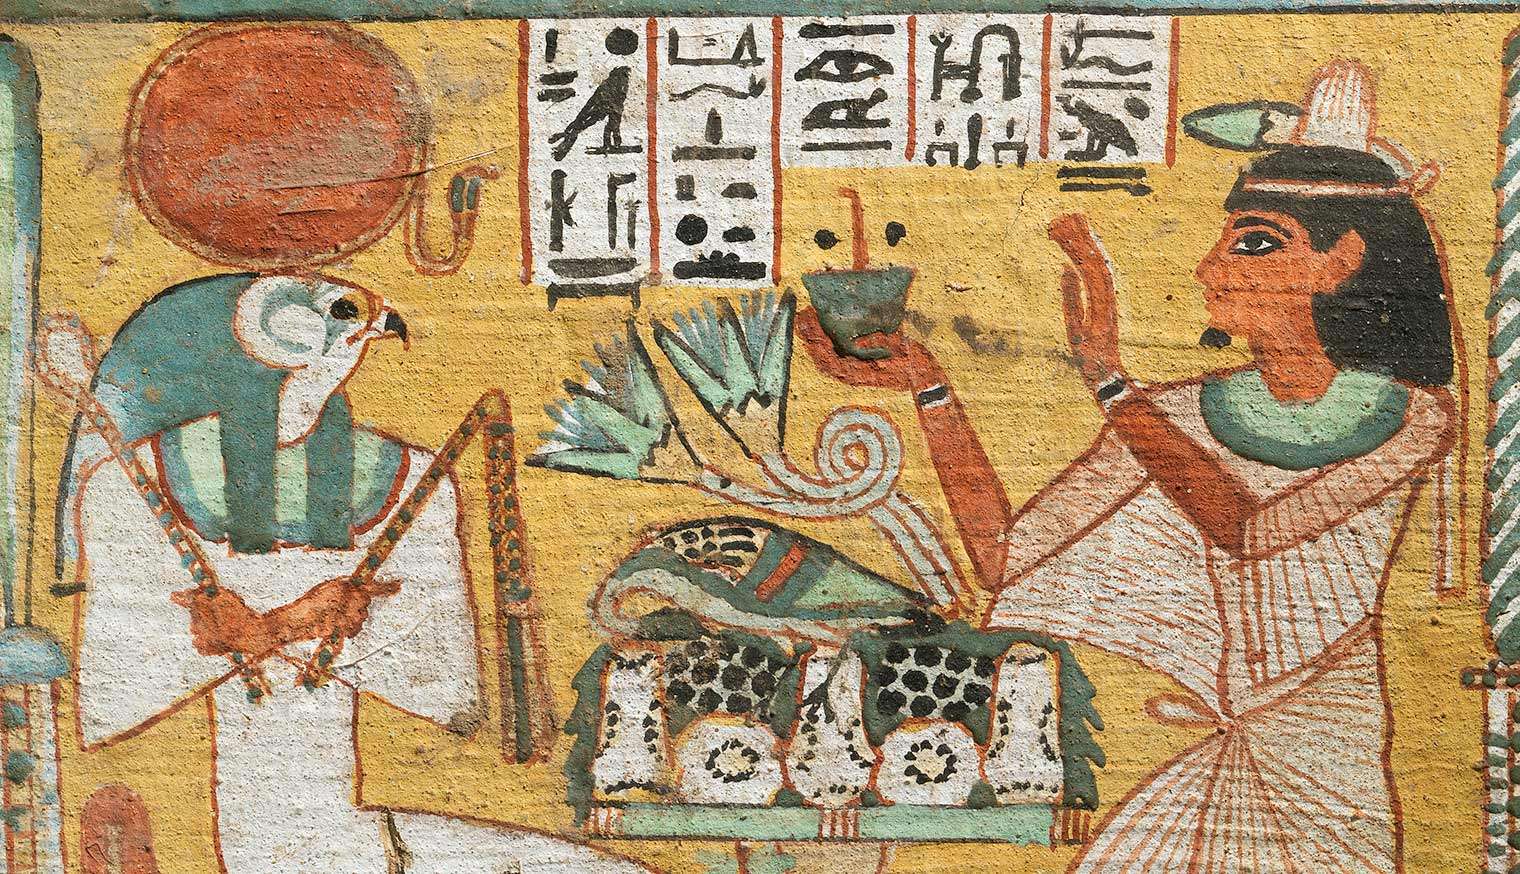 Egypt Painting puzzle online from photo